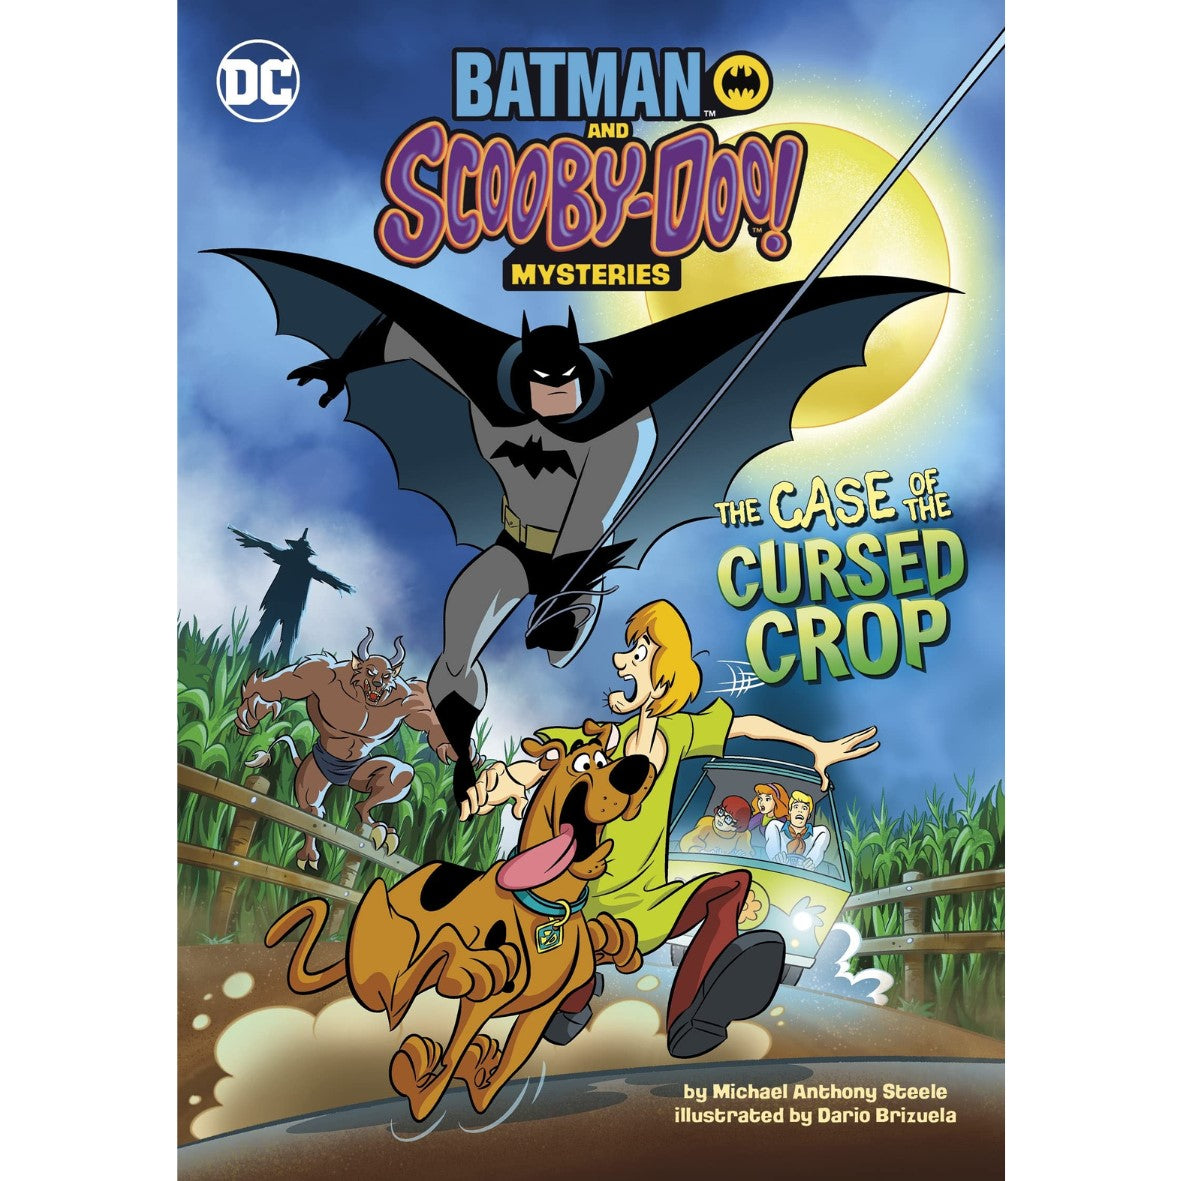 Batman and Scooby-Doo! Mysteries: The Case of the Cursed Crop